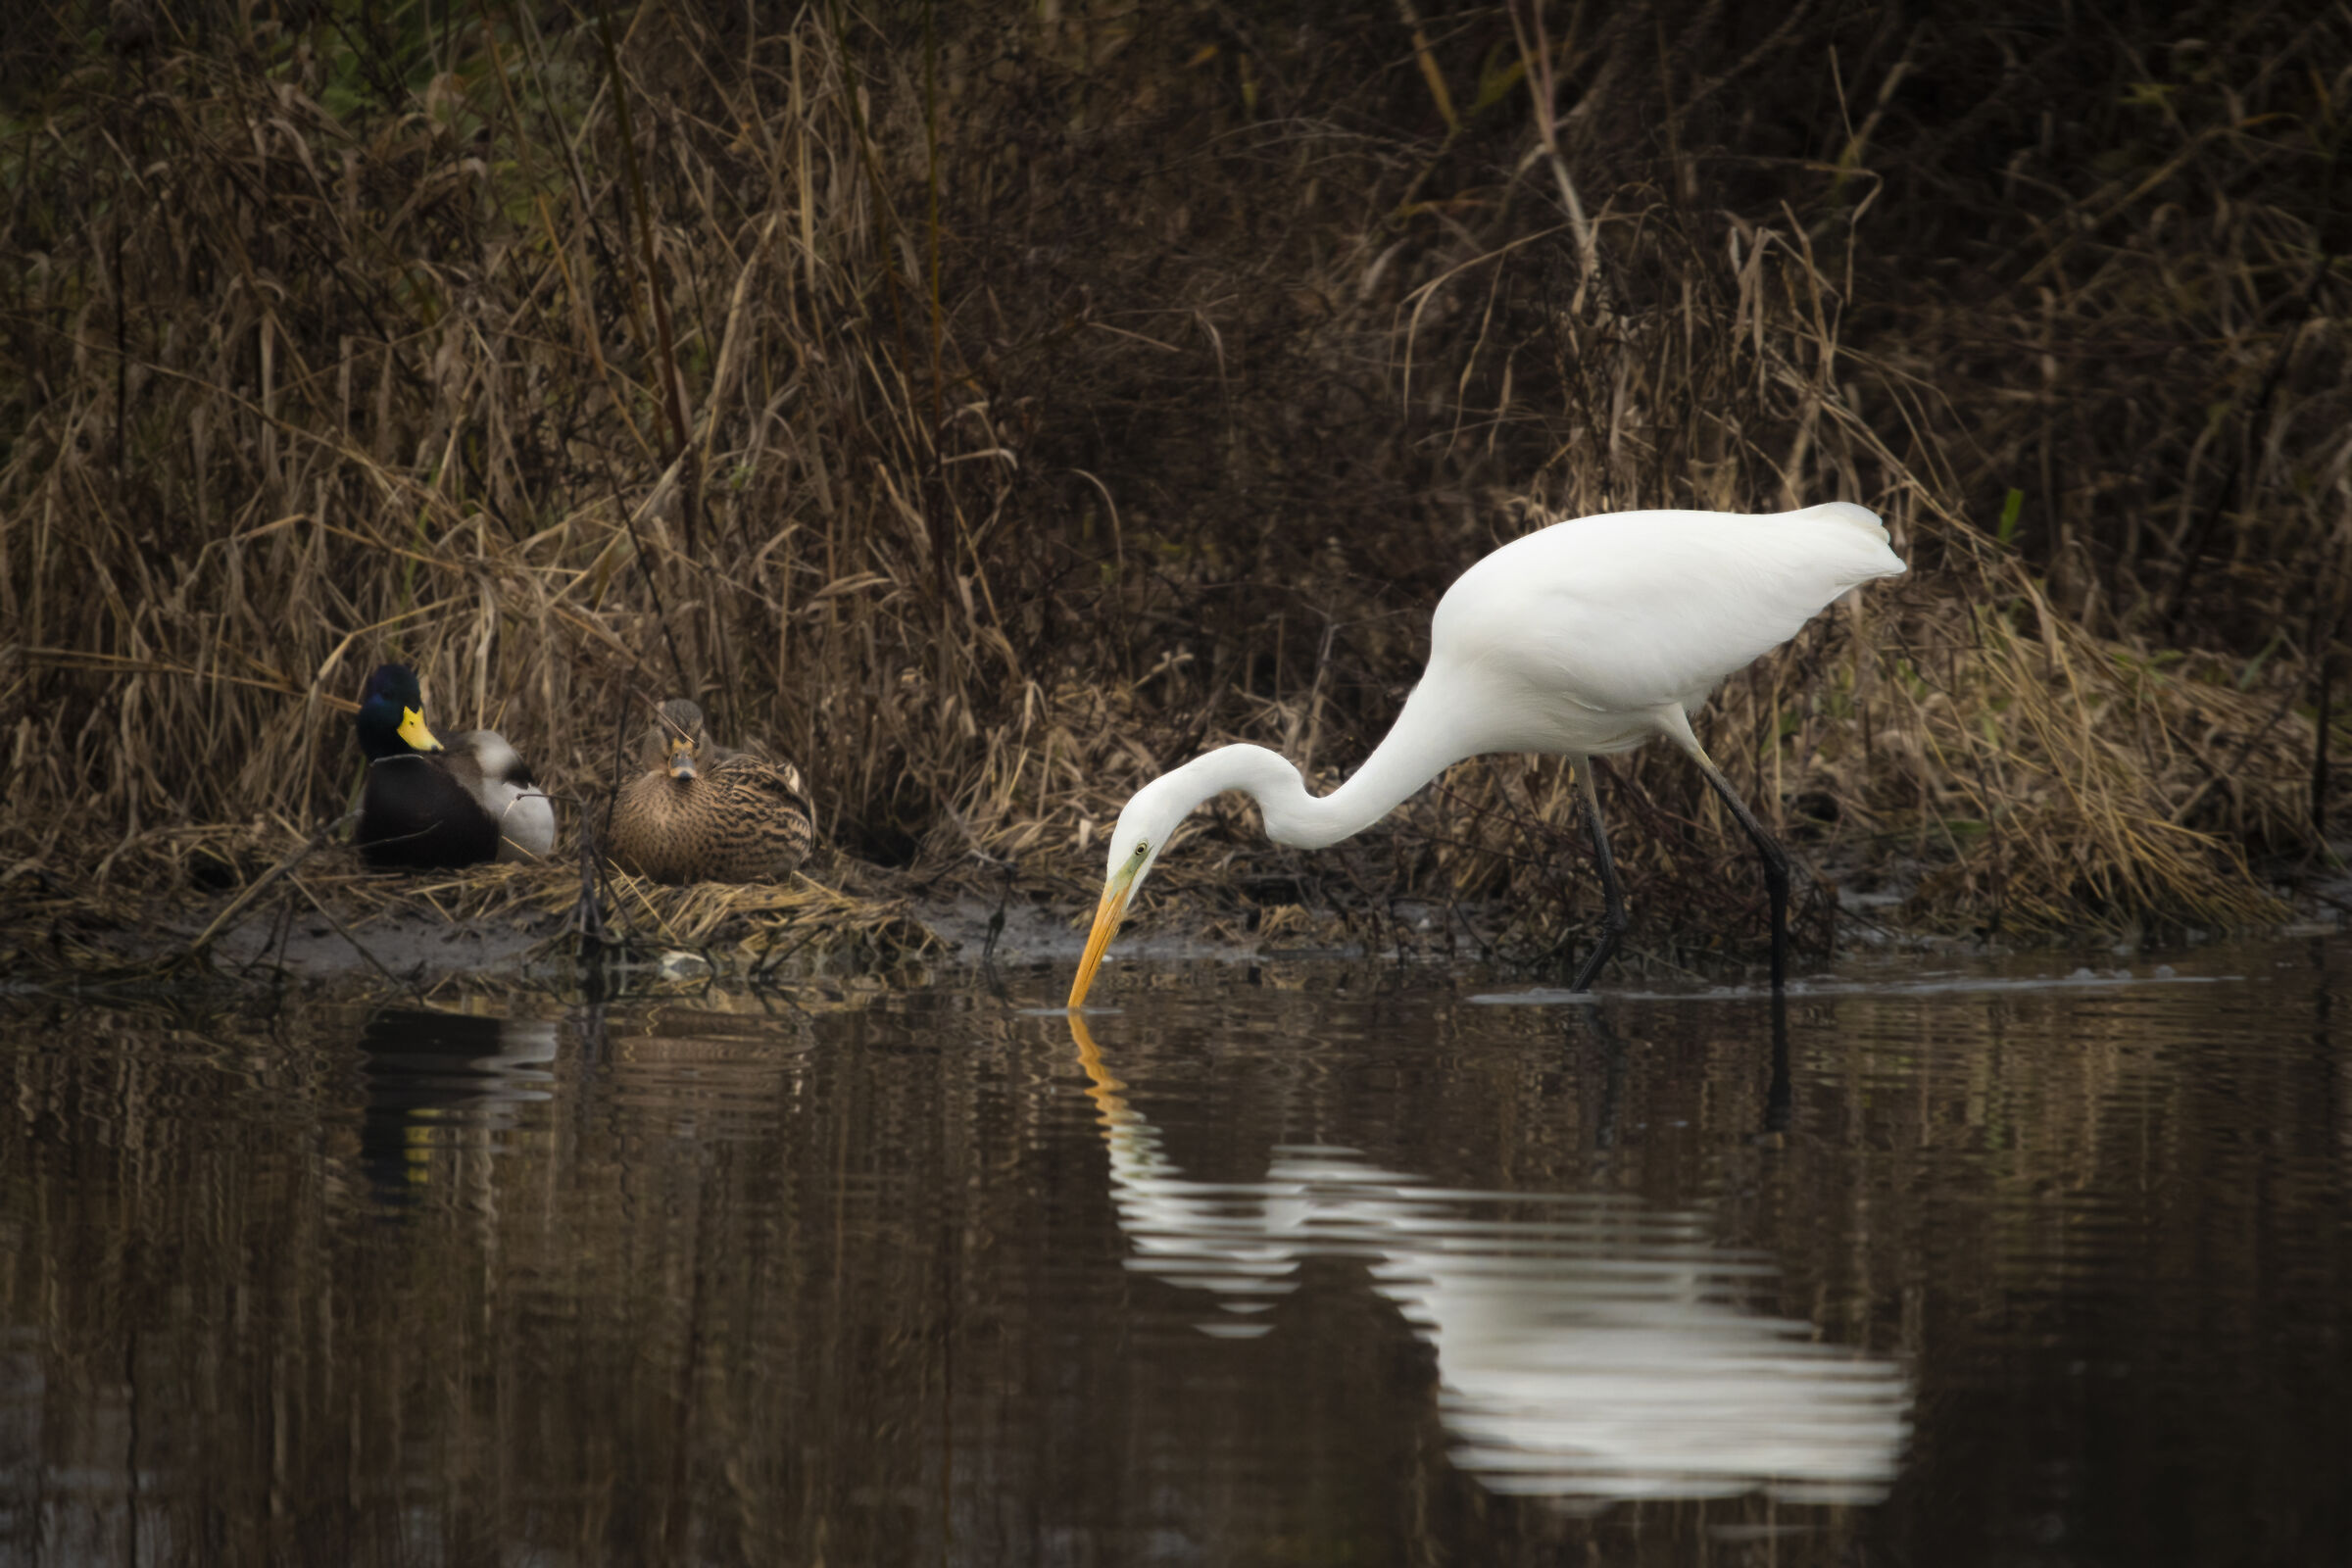 Great white heron on the hunt...